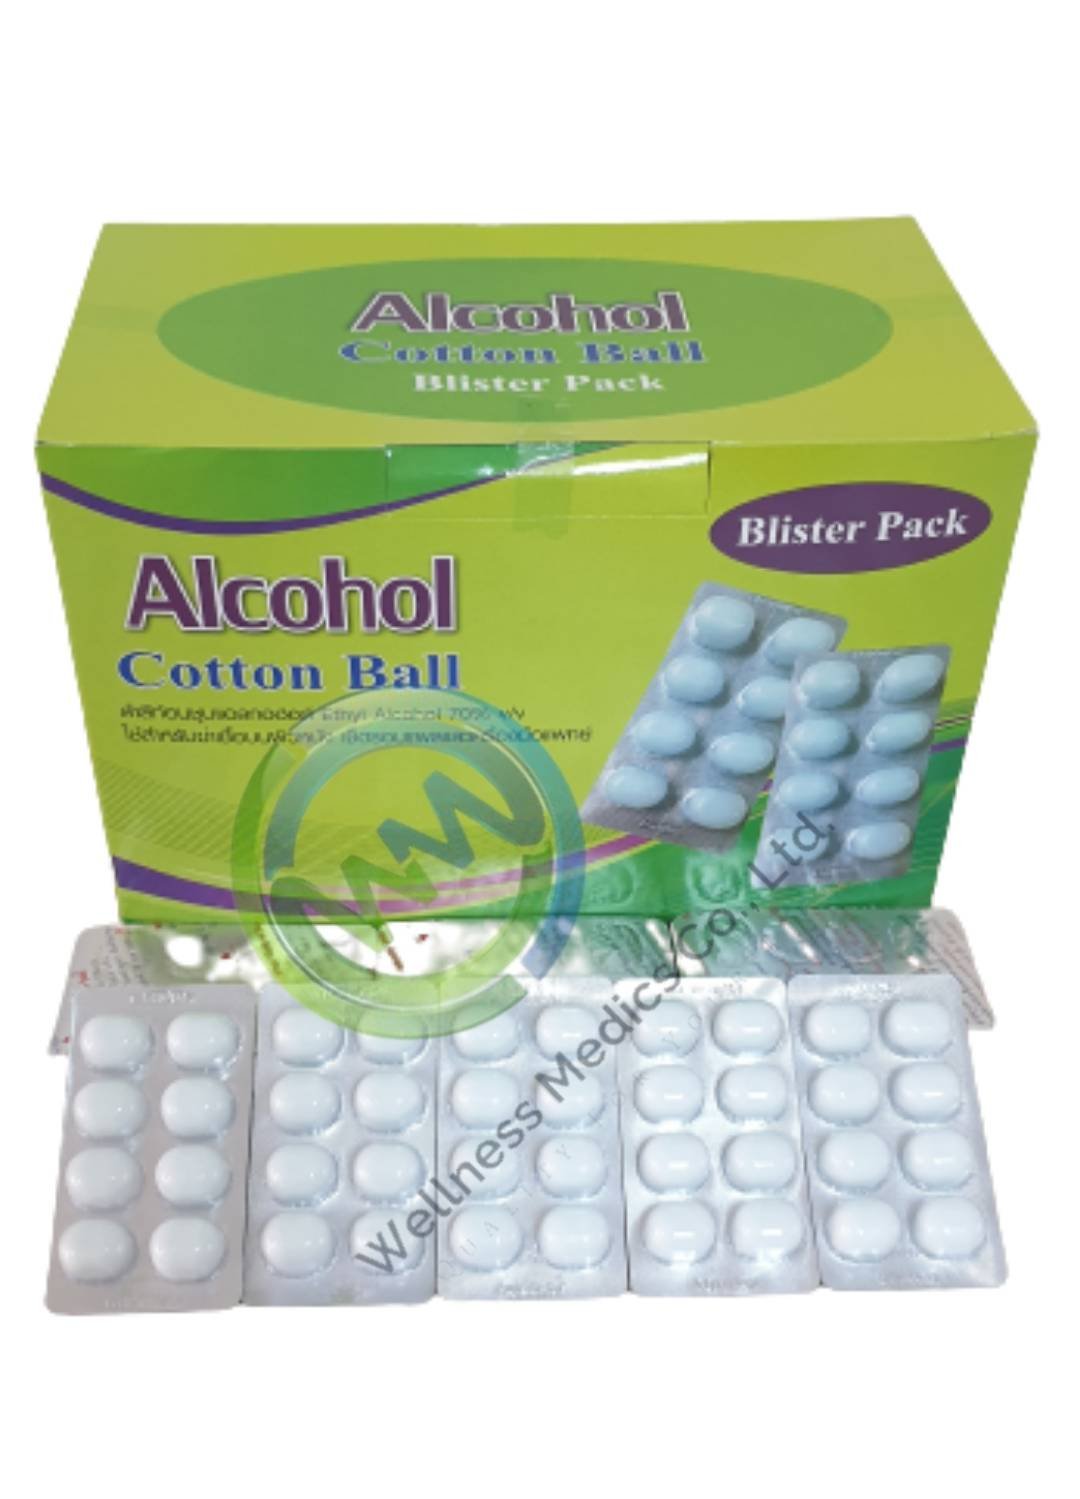 Alcohol Cotton Ball, Alcohol Cotton Ball Blister Pack (100 packs/box)